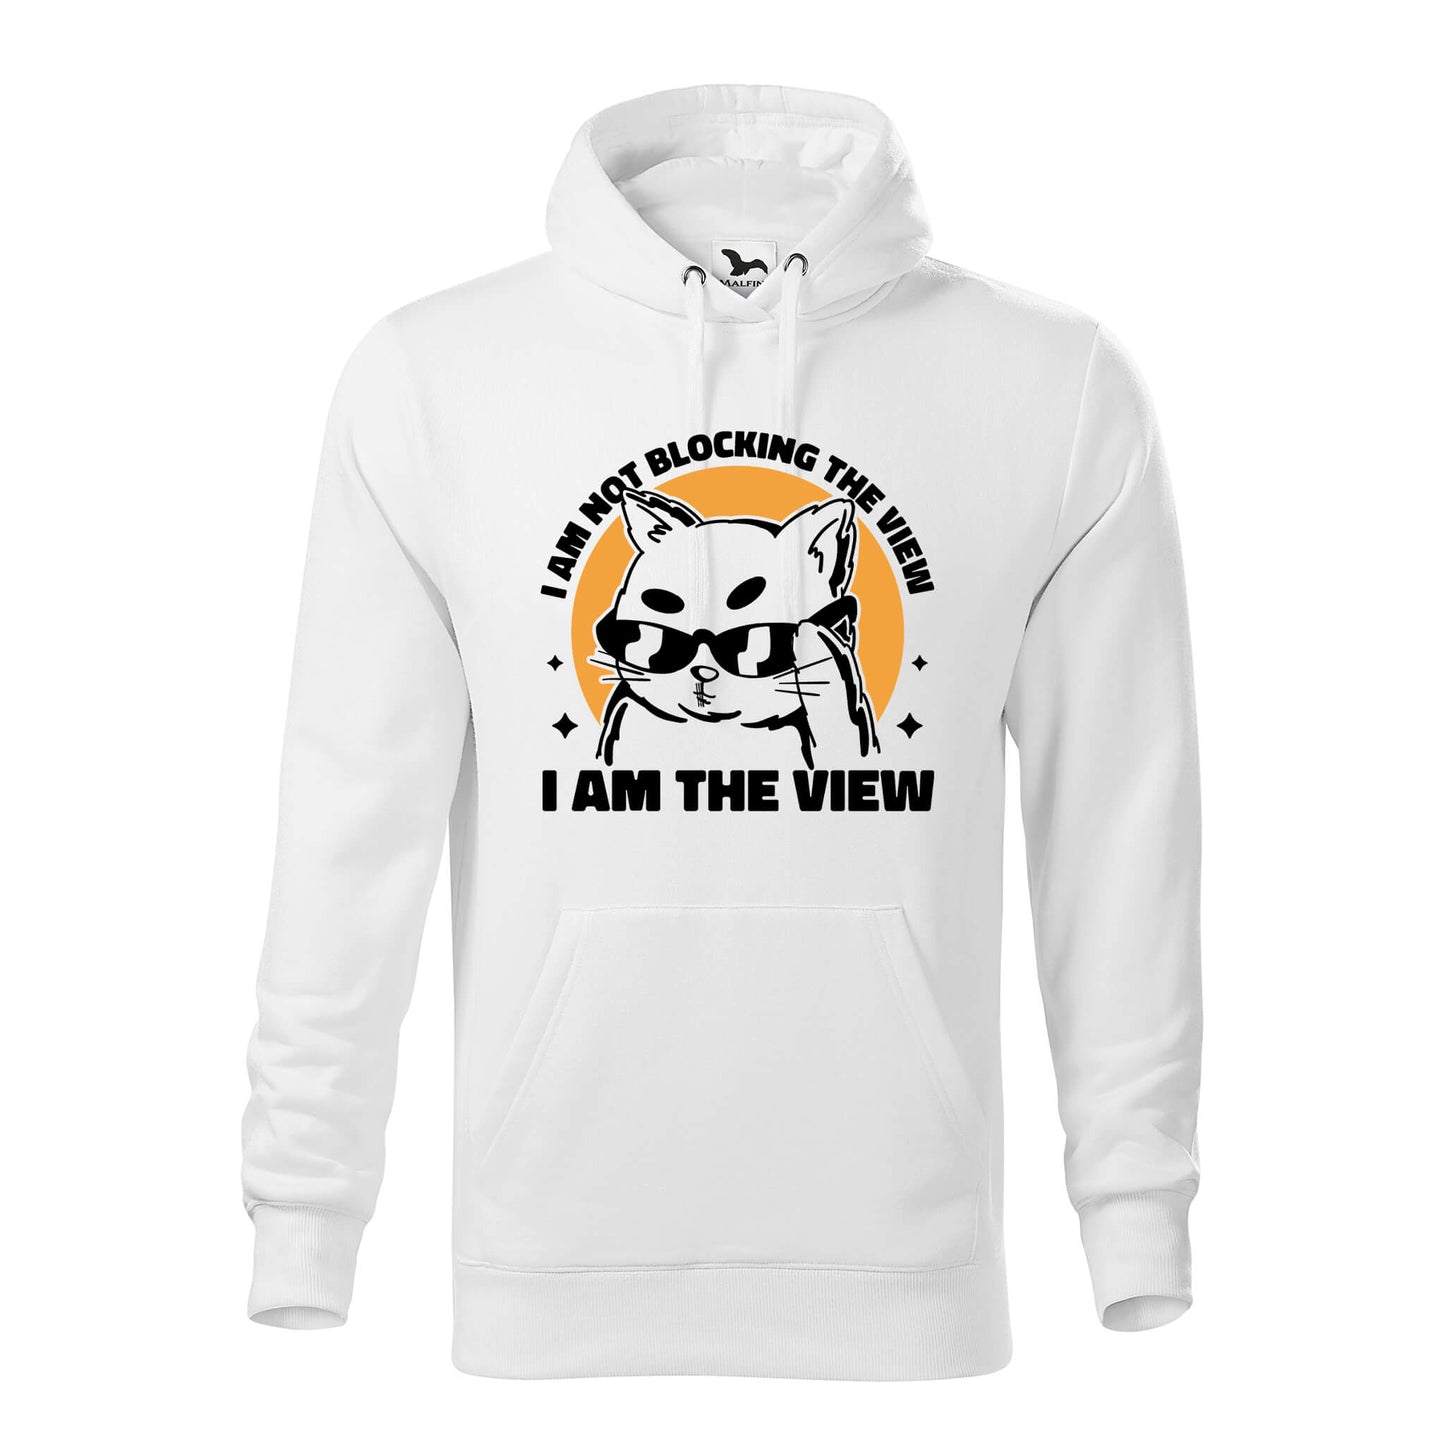 I am the view hoodie - rvdesignprint